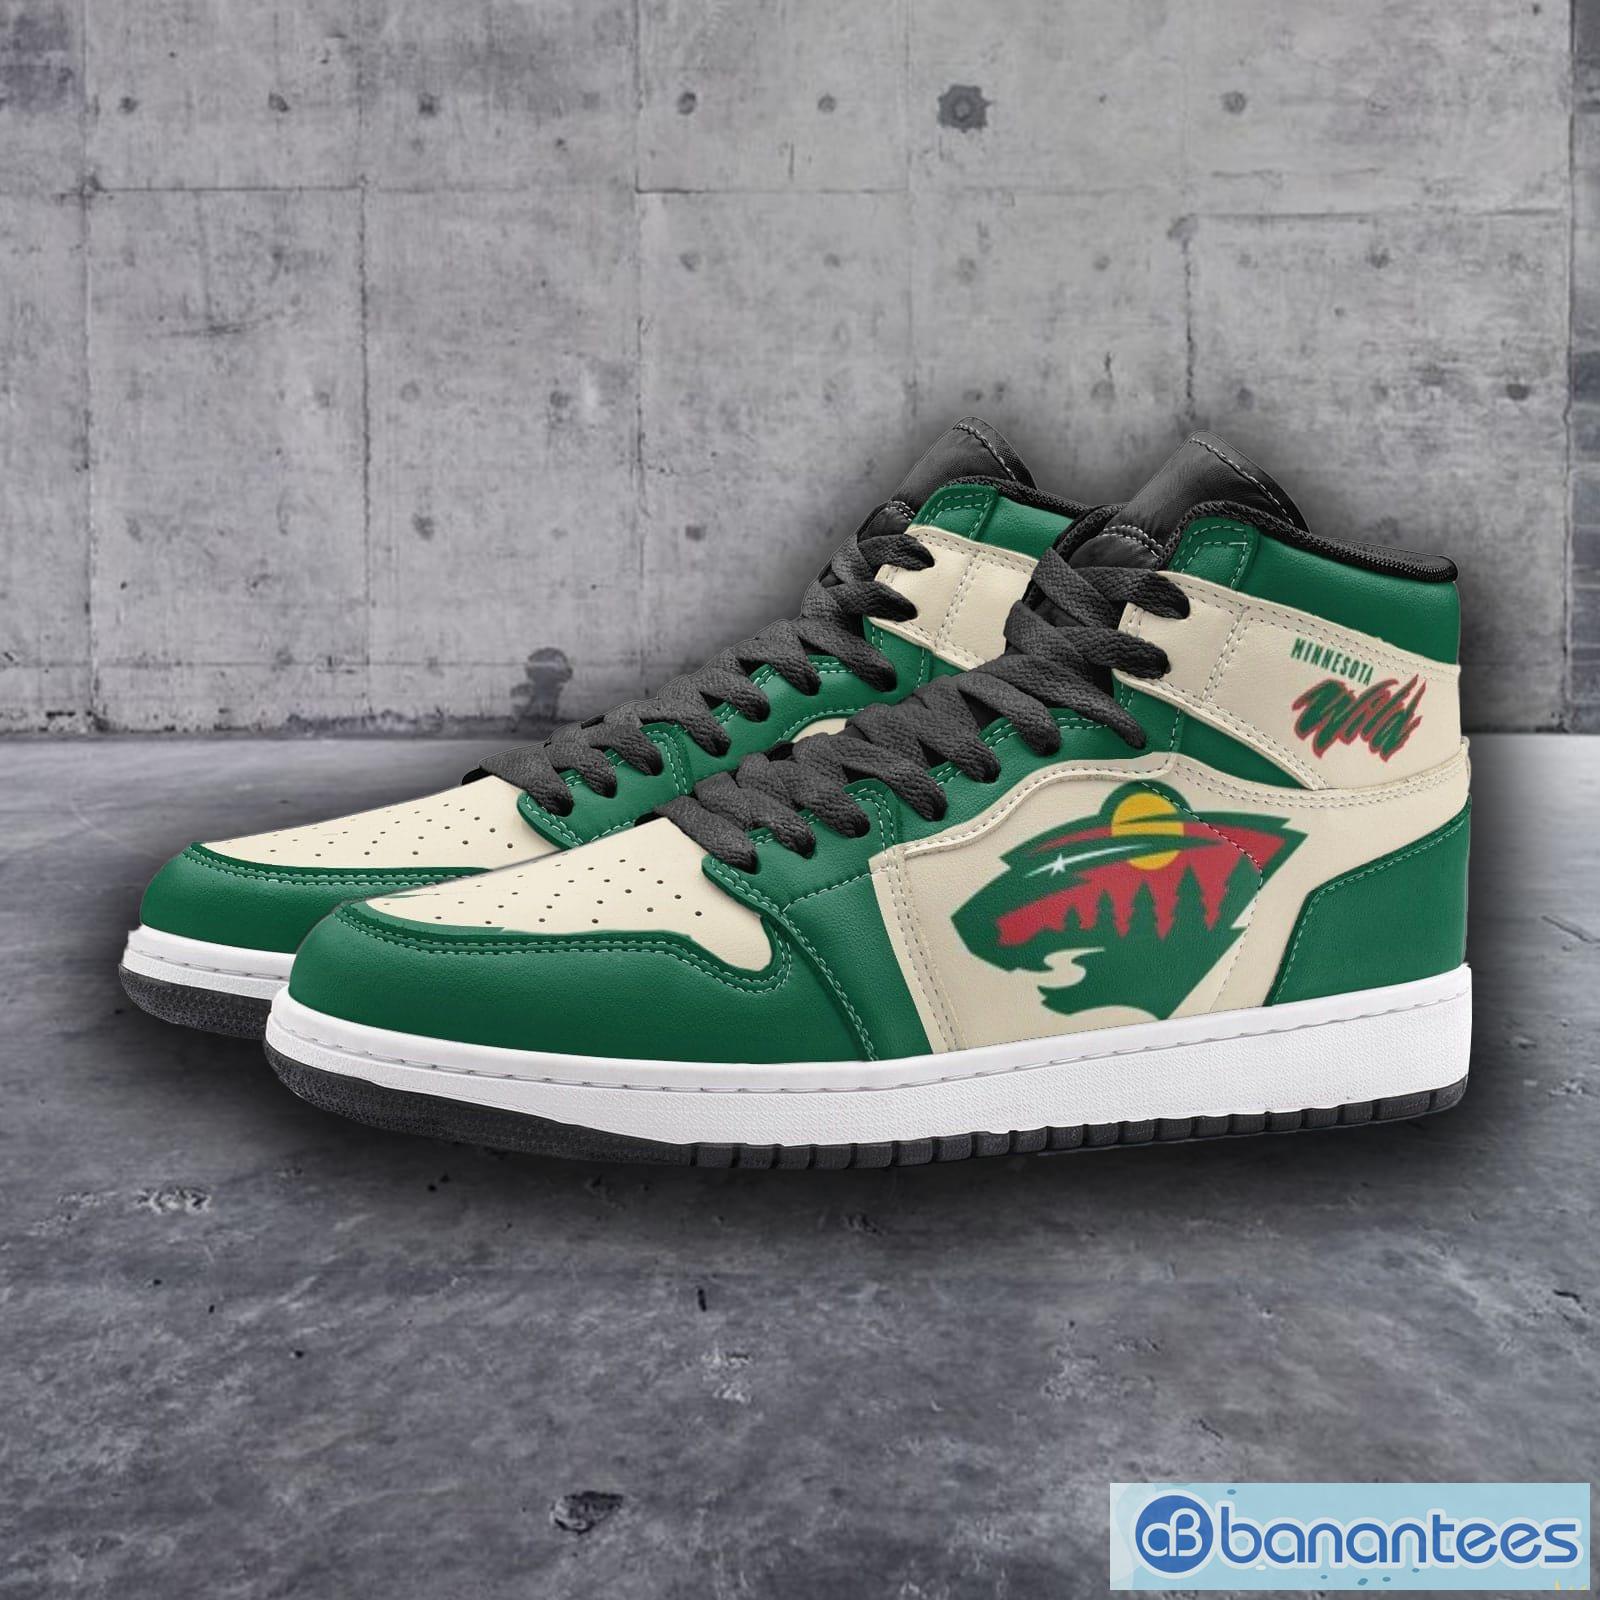 Minnesota Wild Fan Unofficial Running Shoes, Sneakers, Trainers Unisex